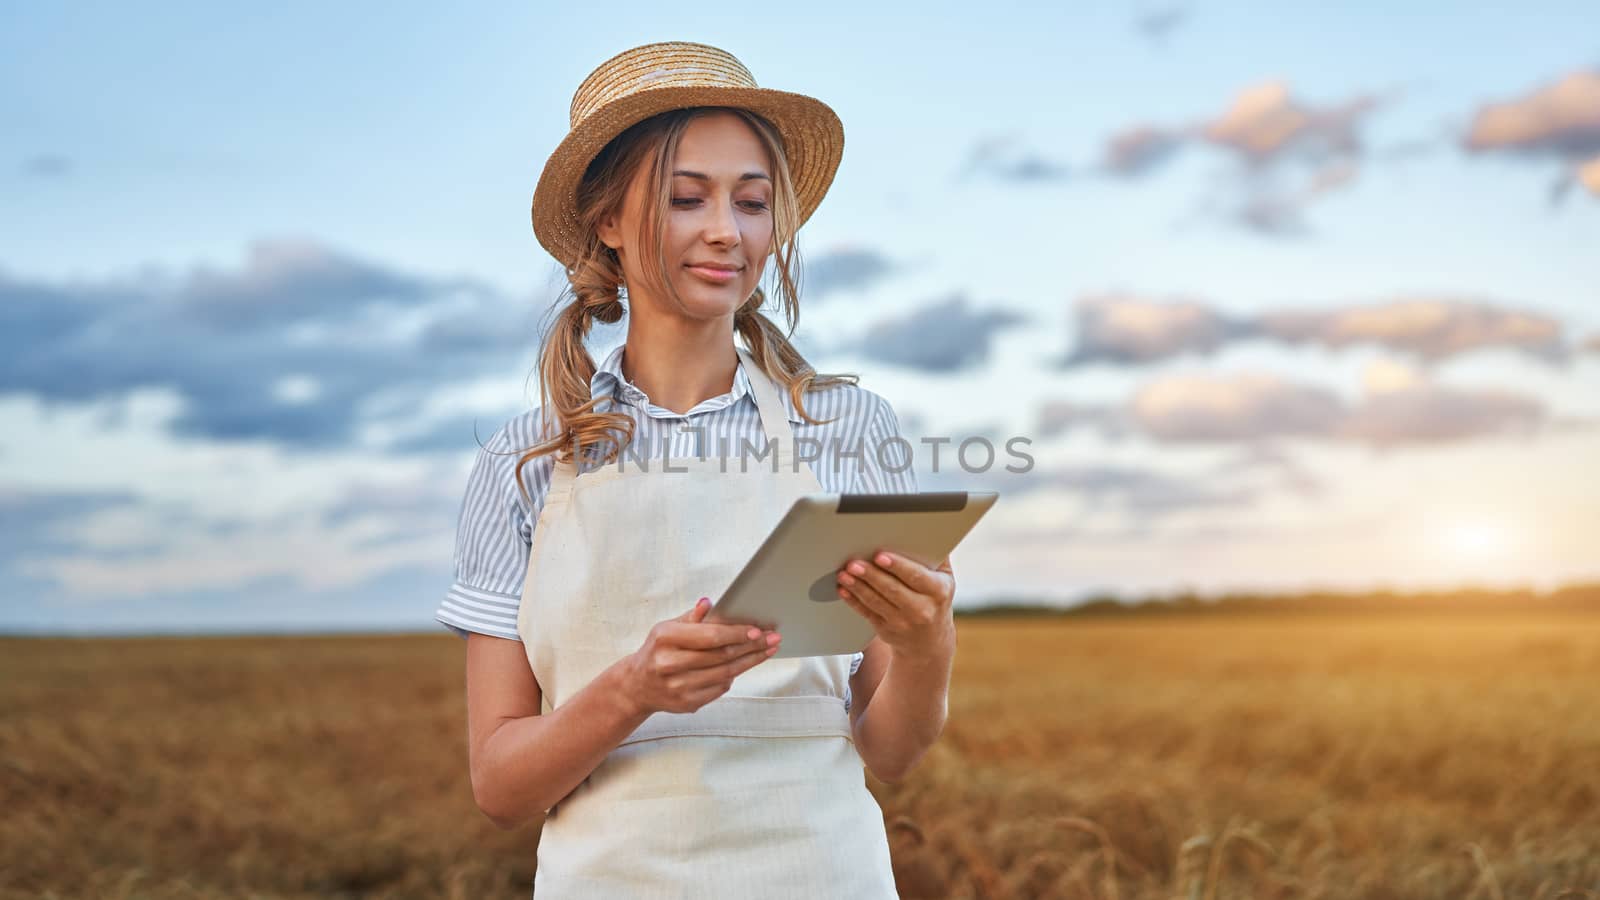 Female agronomist specialist research monitoring analysis data agribusiness Woman farmer straw hat smart farming standing farmland smiling using digital tablet Caucasian worker agricultural field